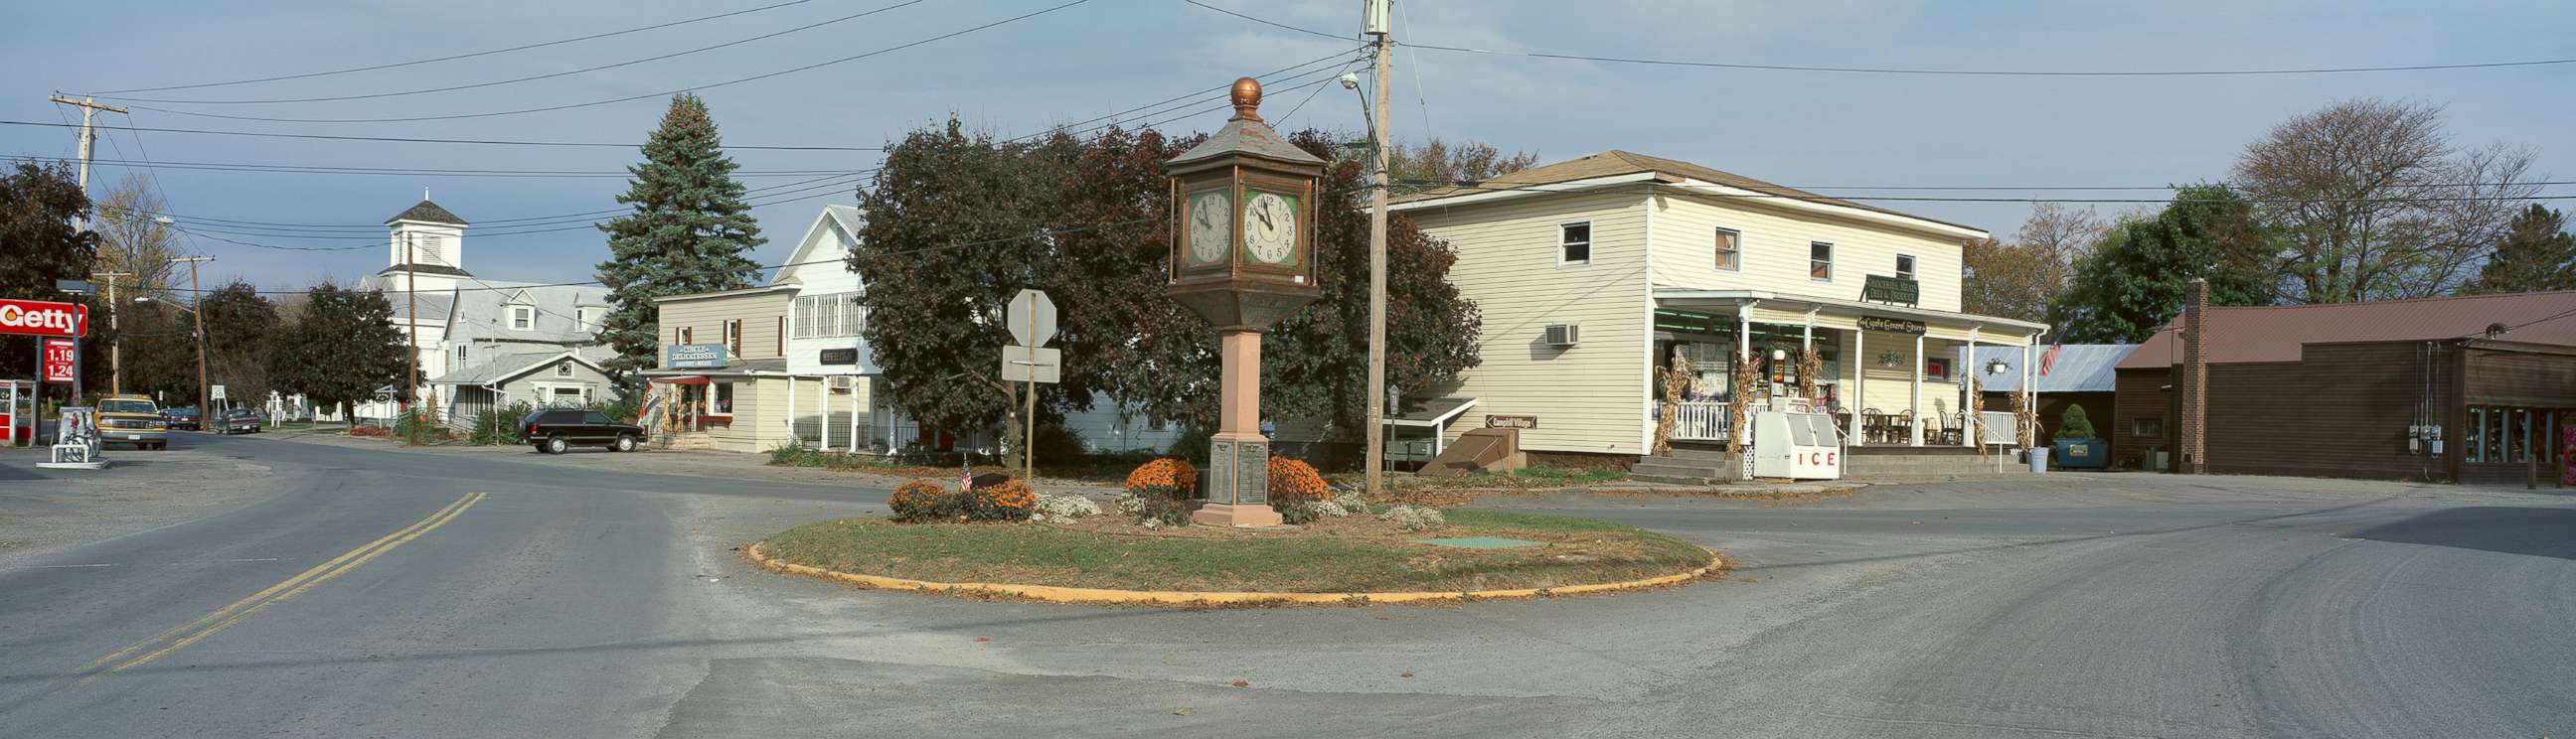 PHOTO: The town clock and traffic circle are pictured in Copake, N.Y. in an undated photo. Camp Pontiac is located in Columbia County, near Copake, N.Y.